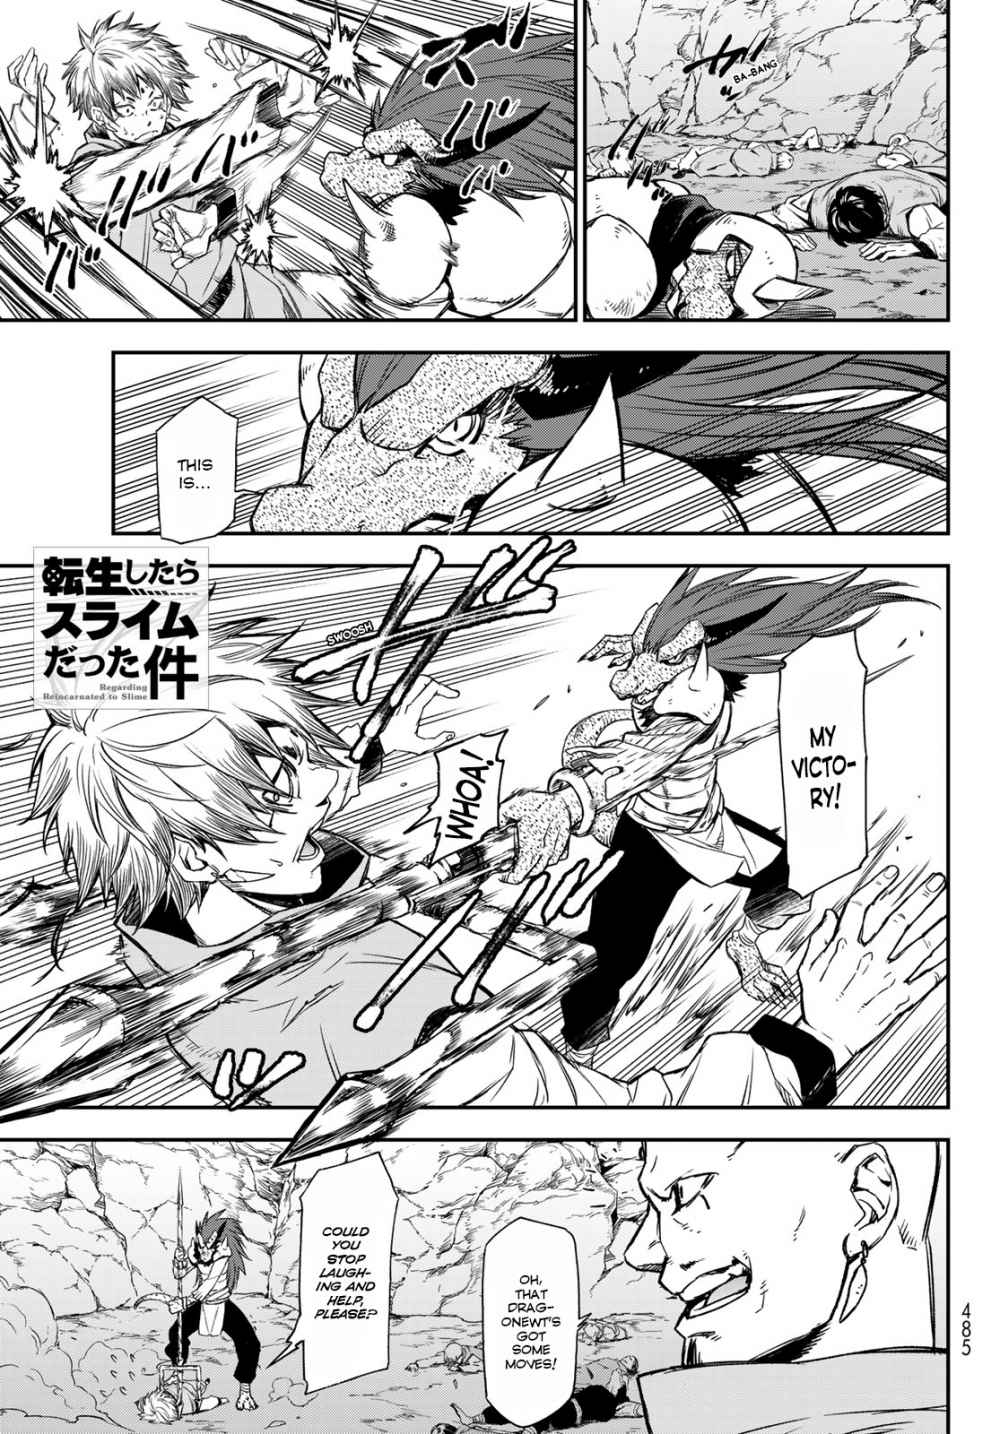 That Time I Got Reincarnated As A Slime - Page 1